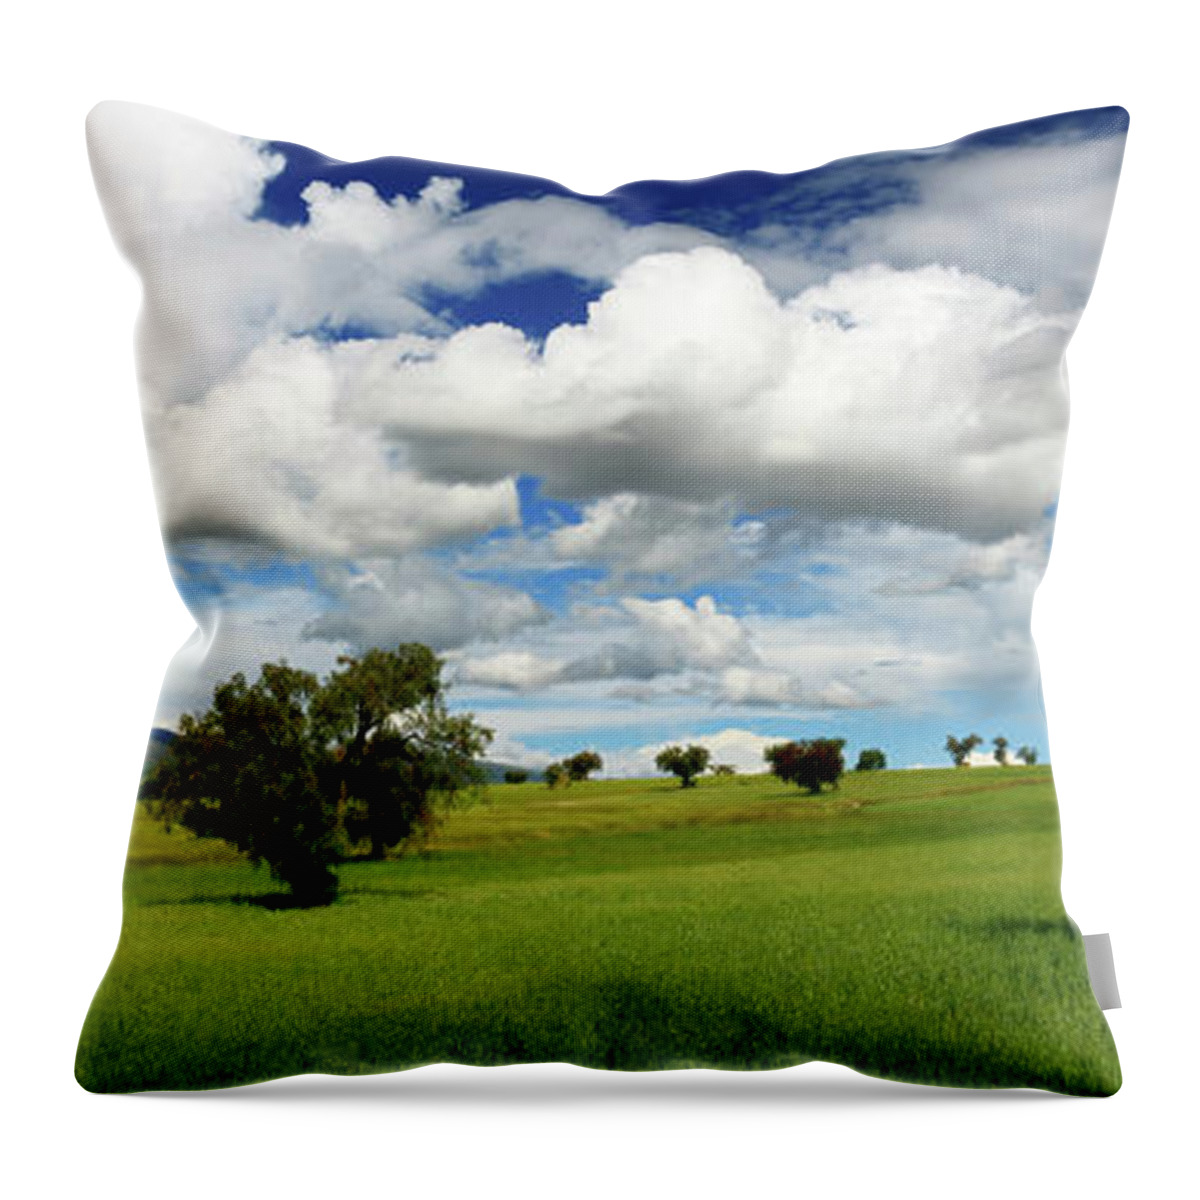 Grass Throw Pillow featuring the photograph Cloudy Sky Over Mountain by Imágenes Del Perú